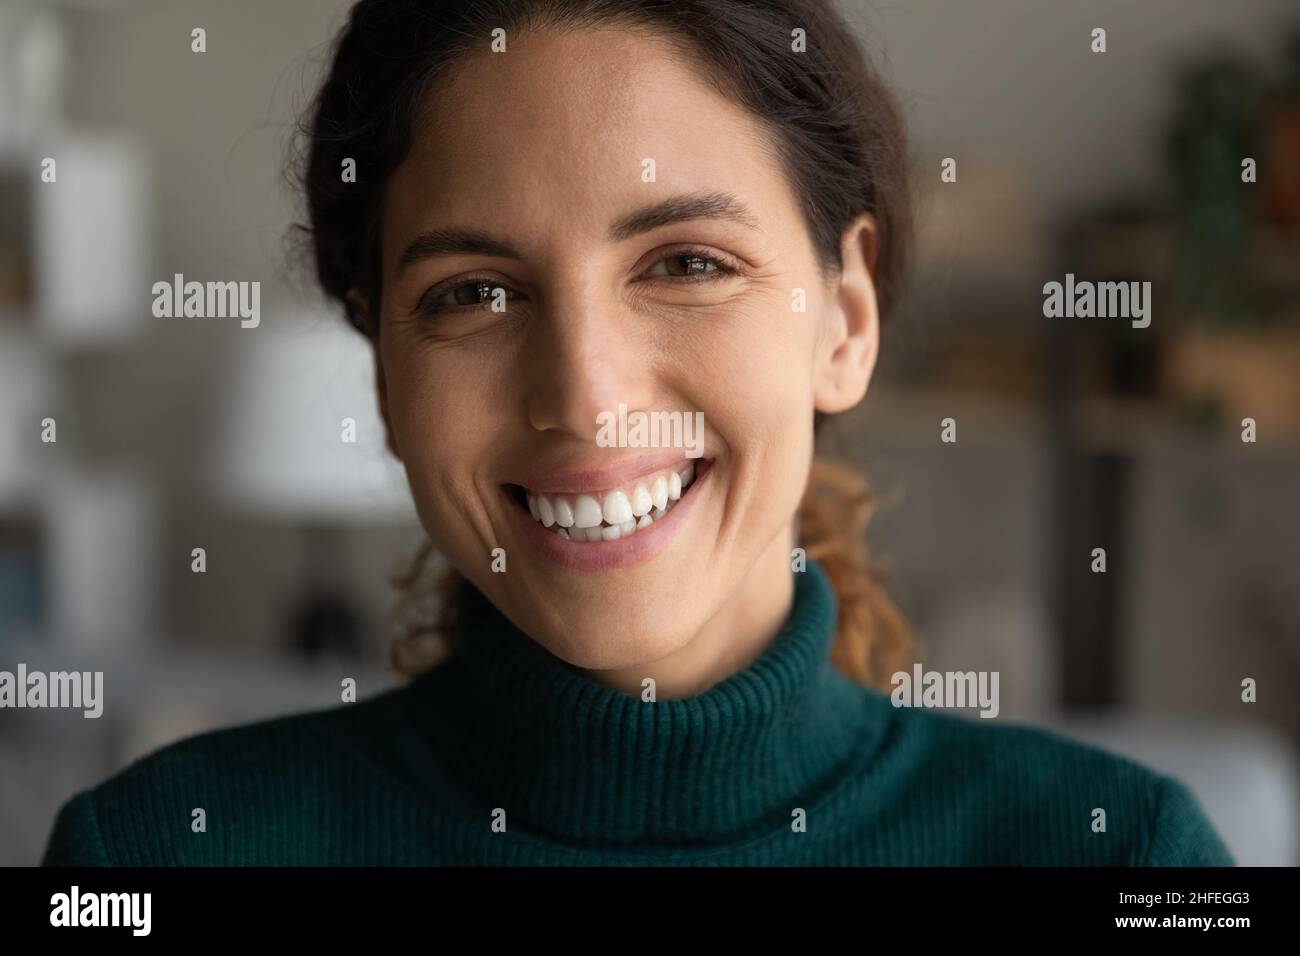 Happy millennial generation woman looking at camera. Stock Photo